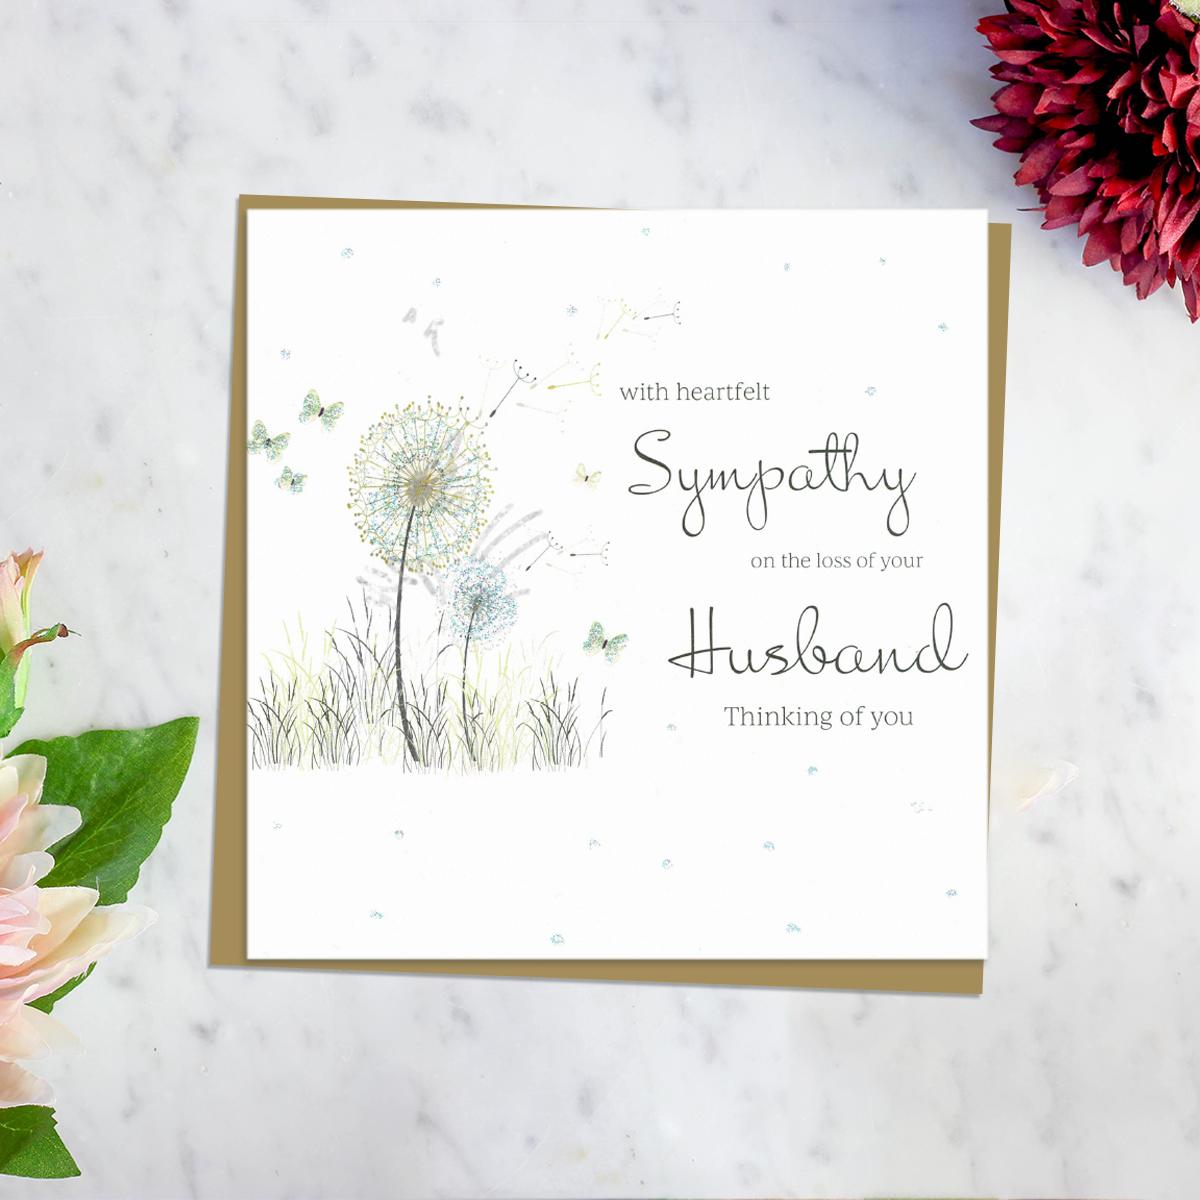 ' With Heartfelt Sympathy On The Loss Of Your Husband Thinking Of You' Card Featuring A Dandelion Blowing In The Wind With Surrounding Butterflies. Blank Inside For Own Message And Complete With Brown Envelope